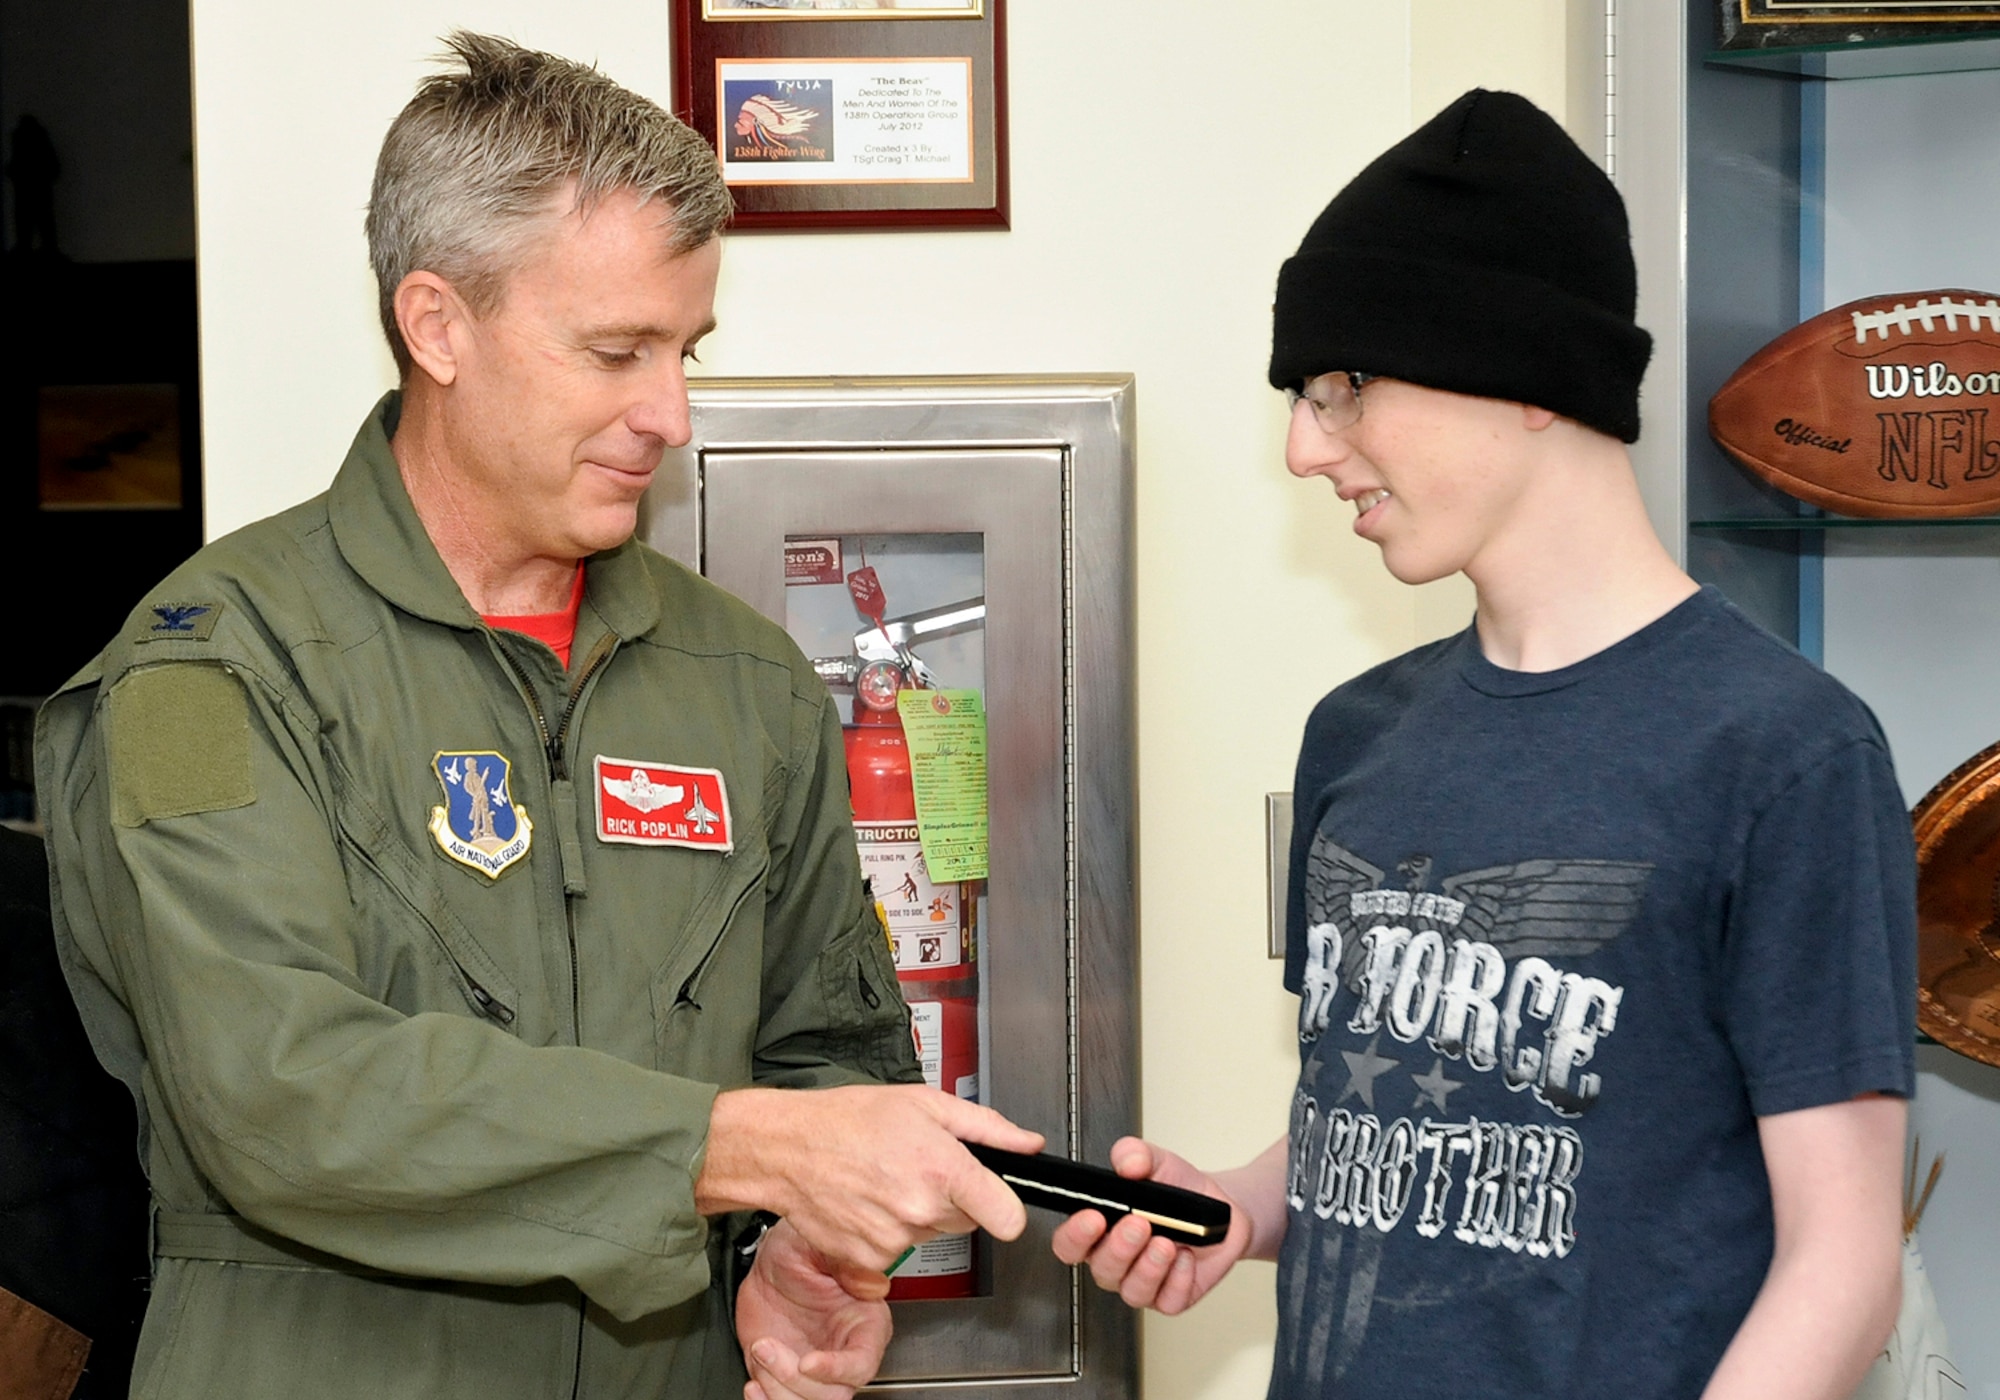 Col. Rick Poplin, 138th Operations Group (OG) Commander presents "pilot for a day" Josh Payton with the keys to the OG during his visit as an honored guest Feb. 19, 2015, at the Tulsa Air National Guard base, Tulsa, Okla.  The pilot for a day program is intended to recognize and honor children with potentially life threatening illnesses and started at the 138th in May 2012, and has hosted seven children since it began.  (U.S. National Guard photo by Senior Master Sgt.  Preston L. Chasteen/Released)